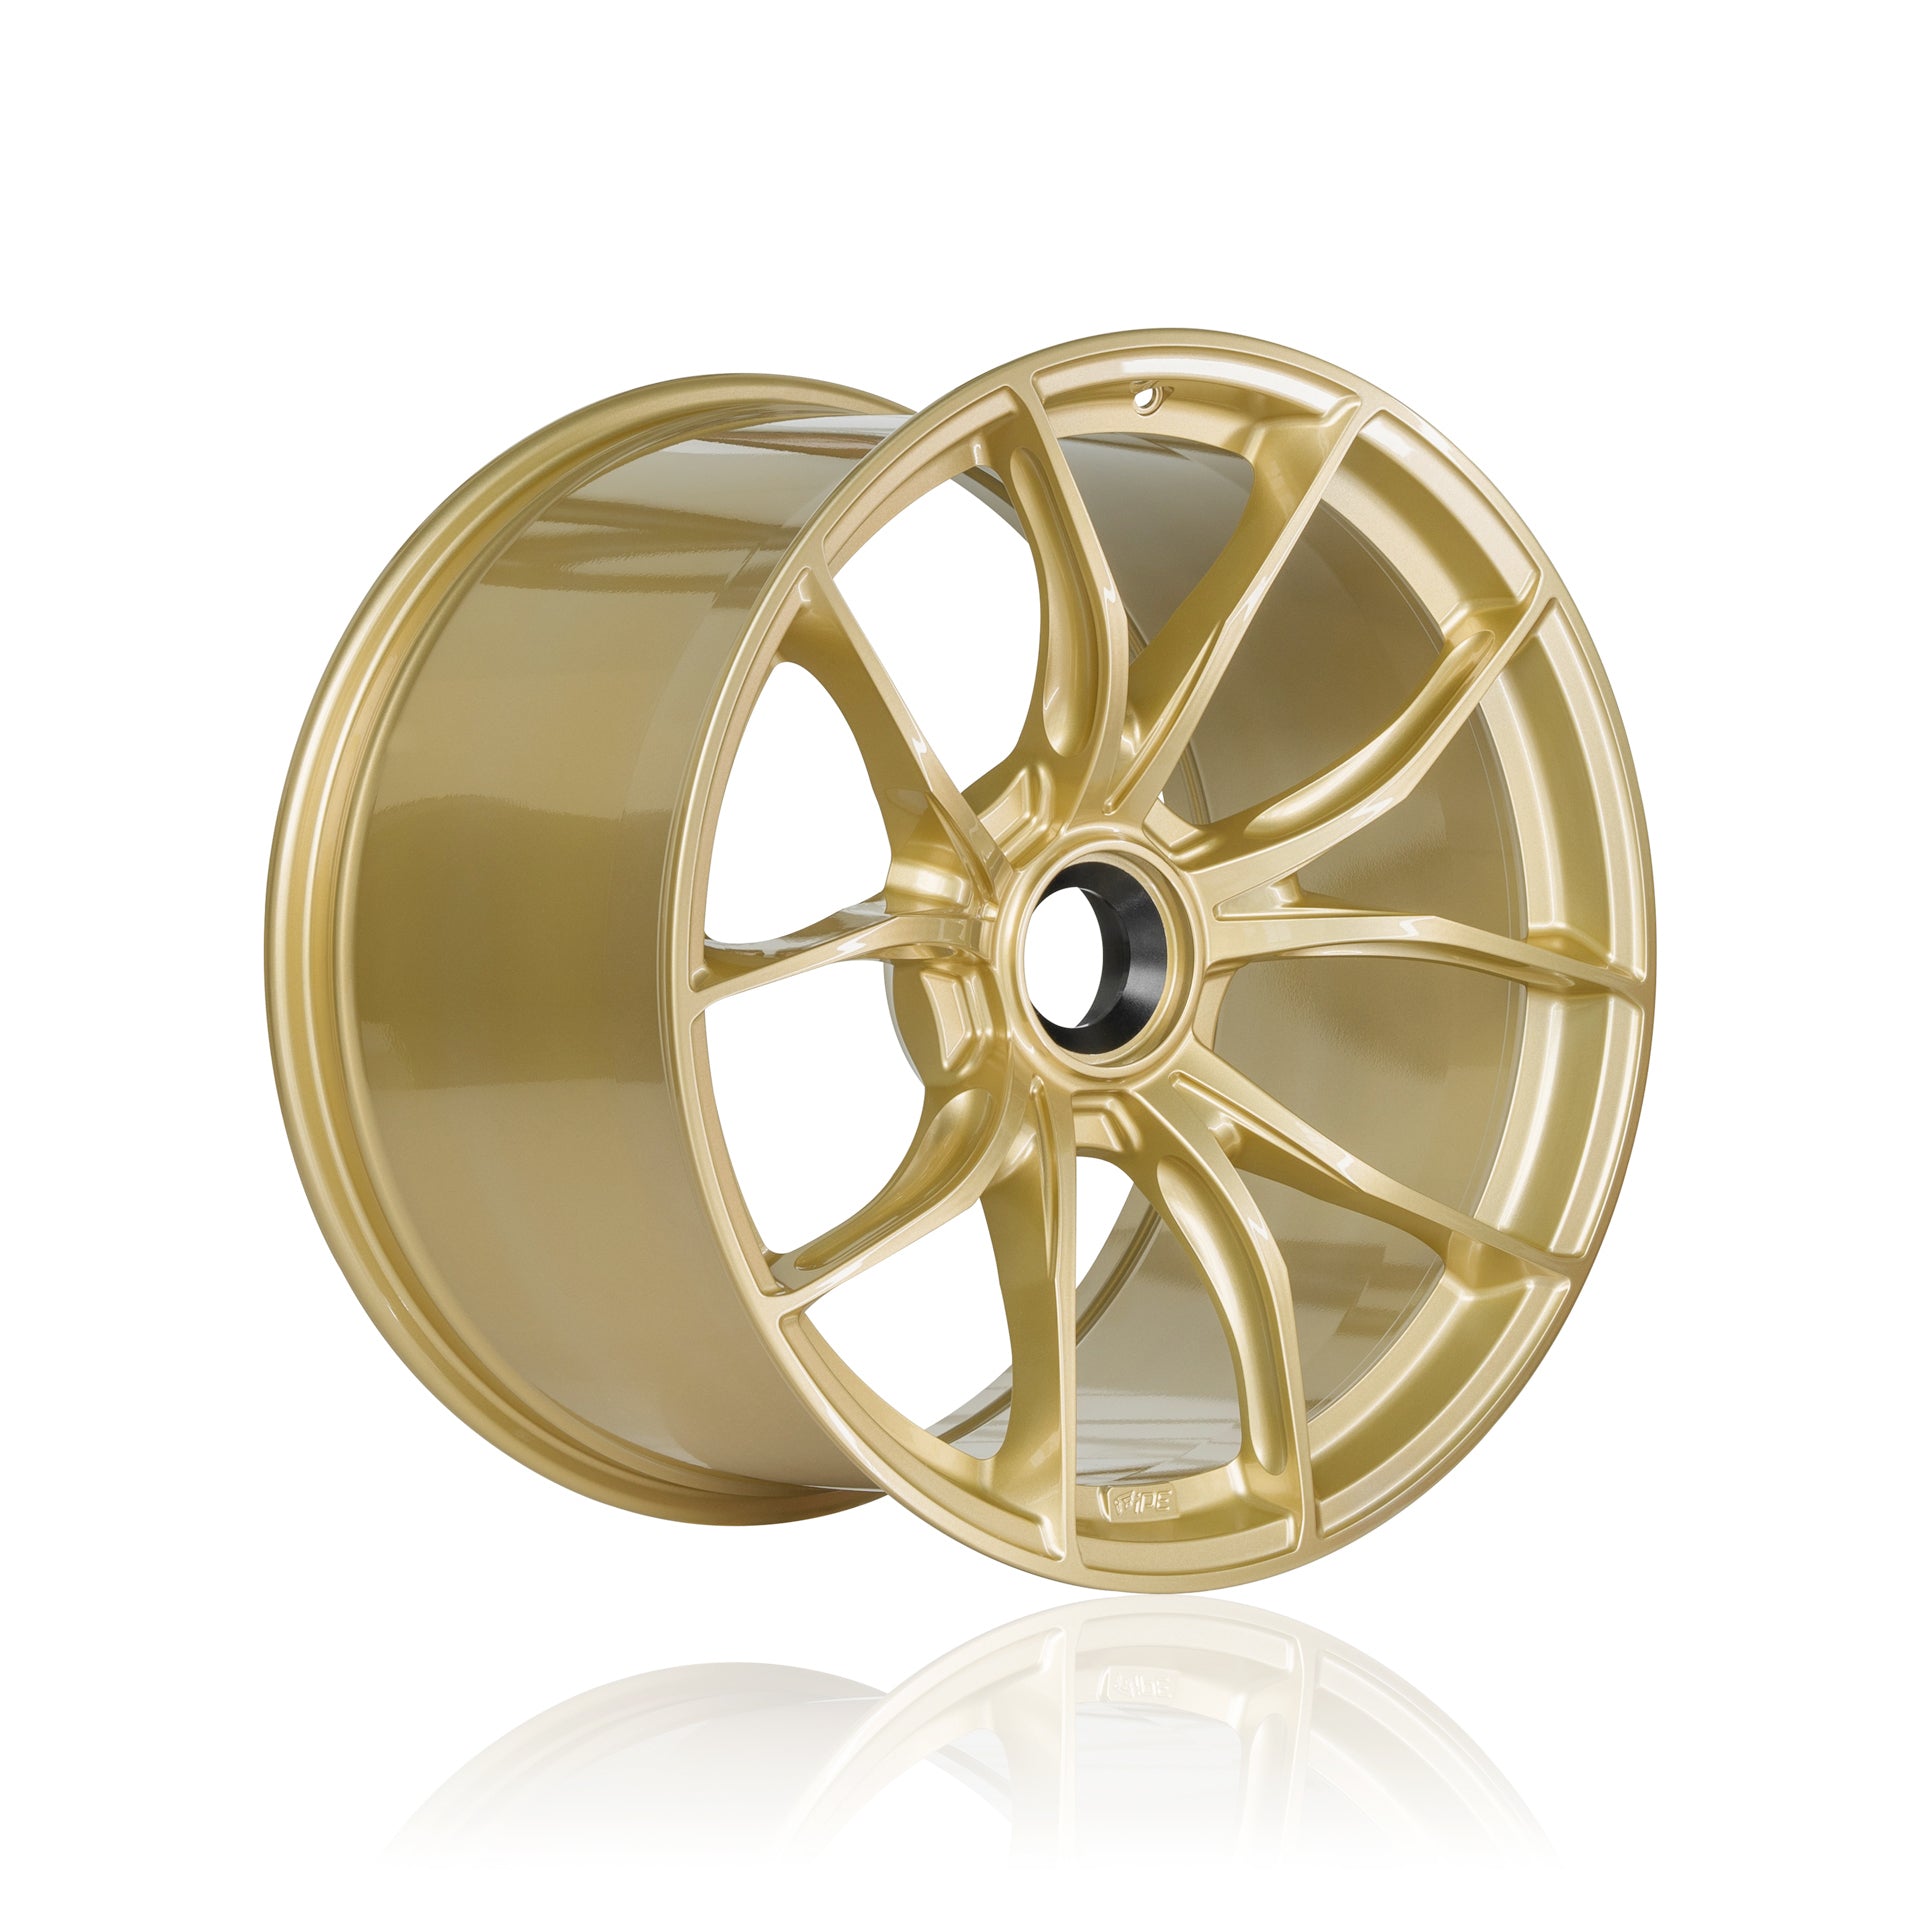 Offset front view of a gold IPE MFR-01 Magnesium wheel on a white background